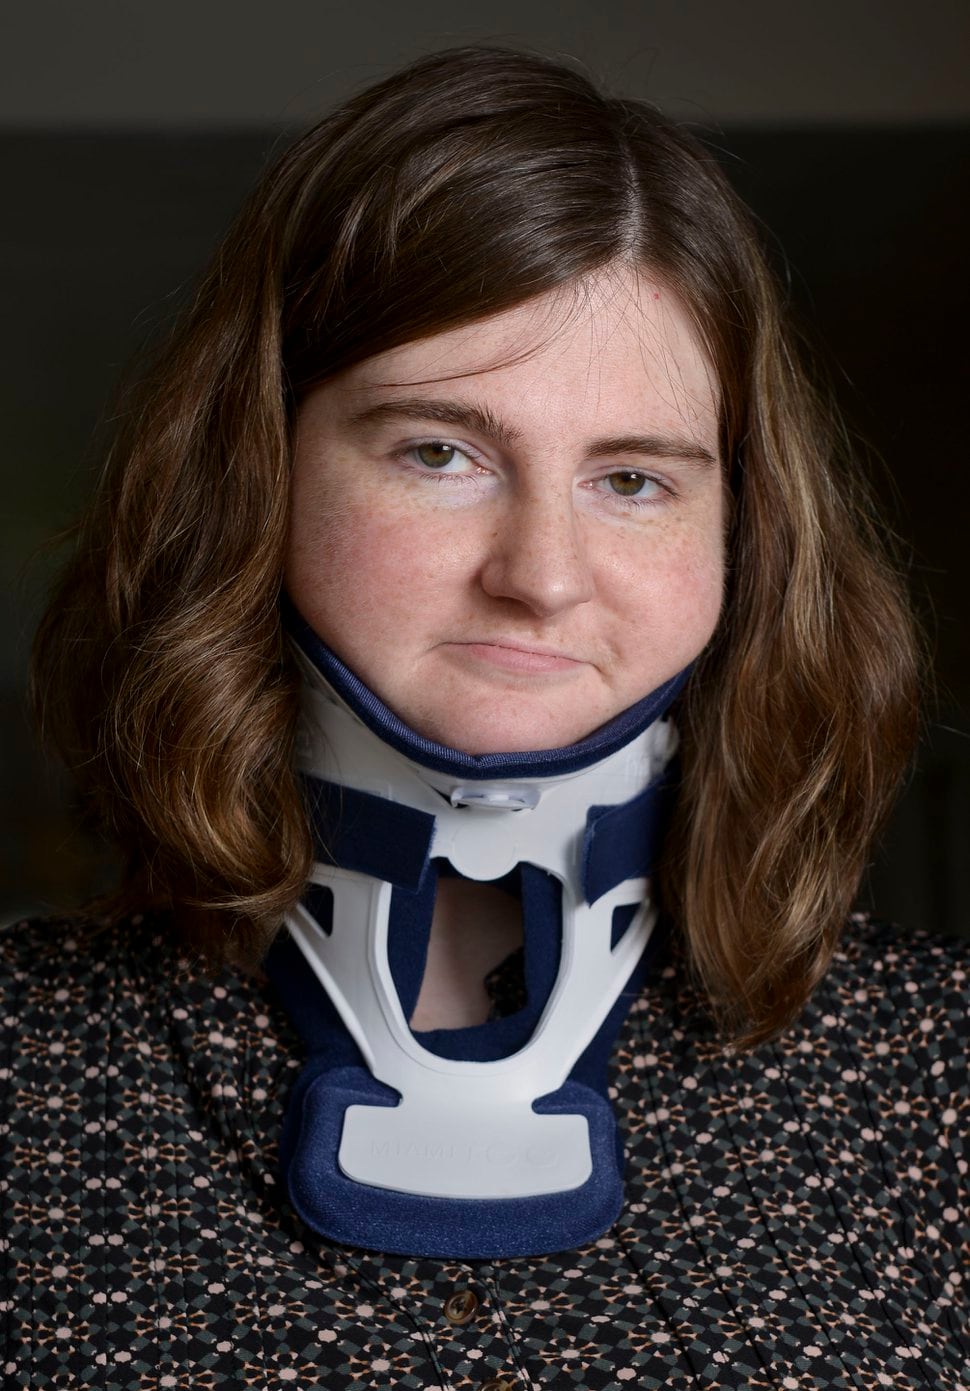 (Leah Hogsten | The Salt Lake Tribune) Julie Rasmussen, 27, is in need of surgery on her spine to relieve her pain from Ehlers-Danlos syndrome. Rasmussen said she will continue to suffer seizures and headaches until the COVID-19 pandemic elective surgery measures are lifted, pictured April 22, 2020.